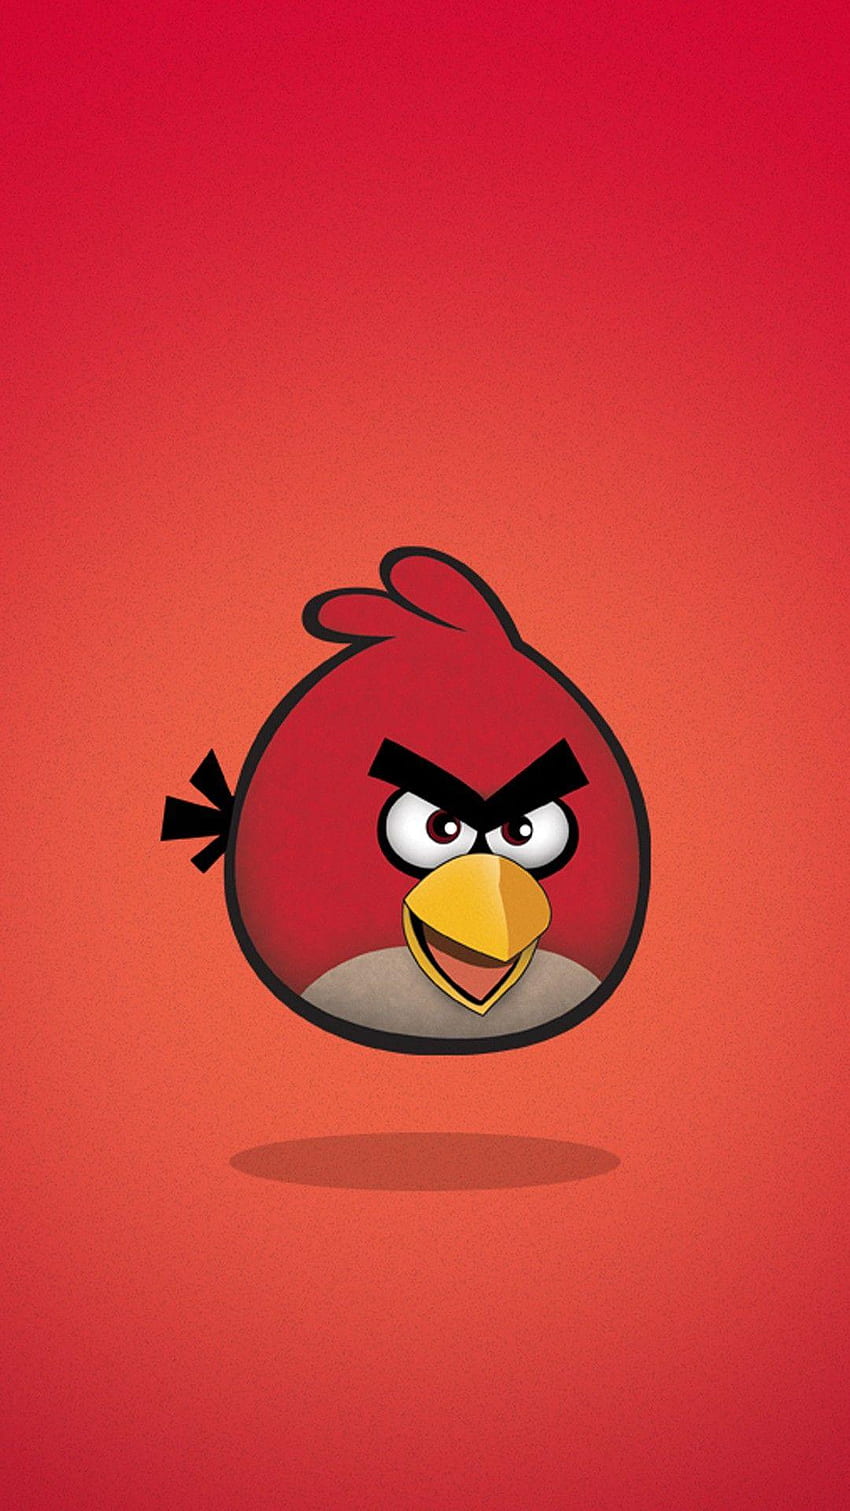 Angry Bird Wallpapers  Top 30 Best Angry Bird Wallpapers Download